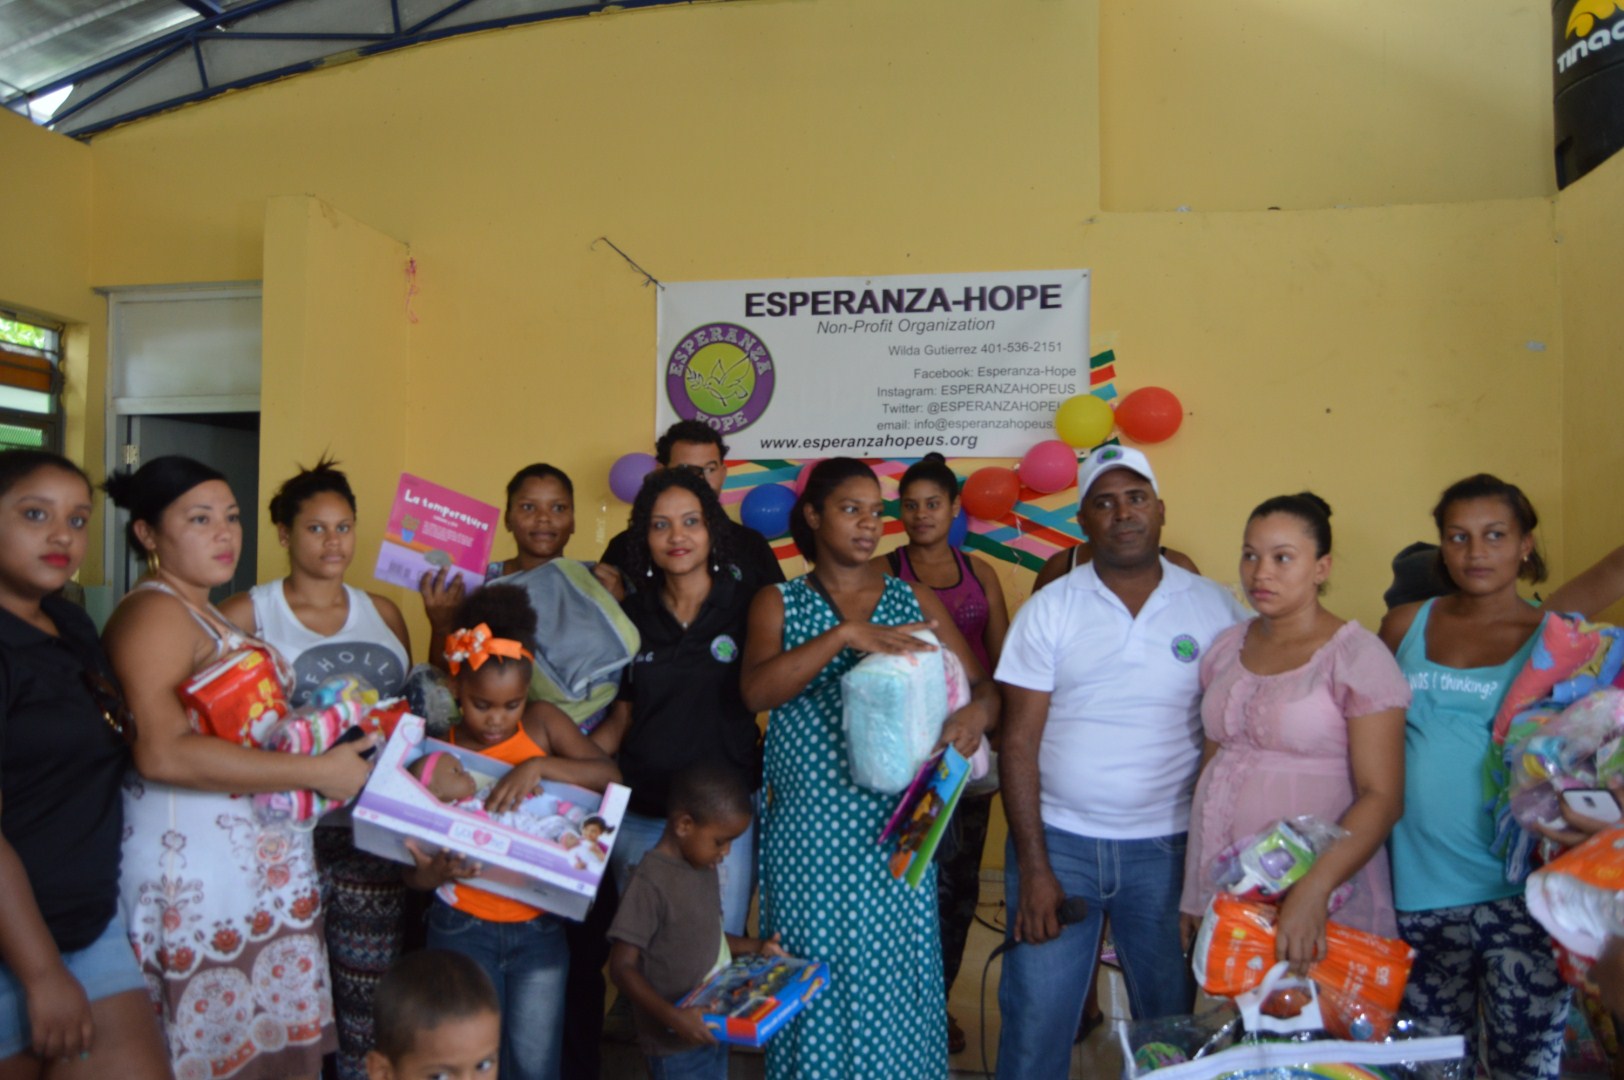 The mothers and some of their children holding toys, diapers, and clothes, another angle